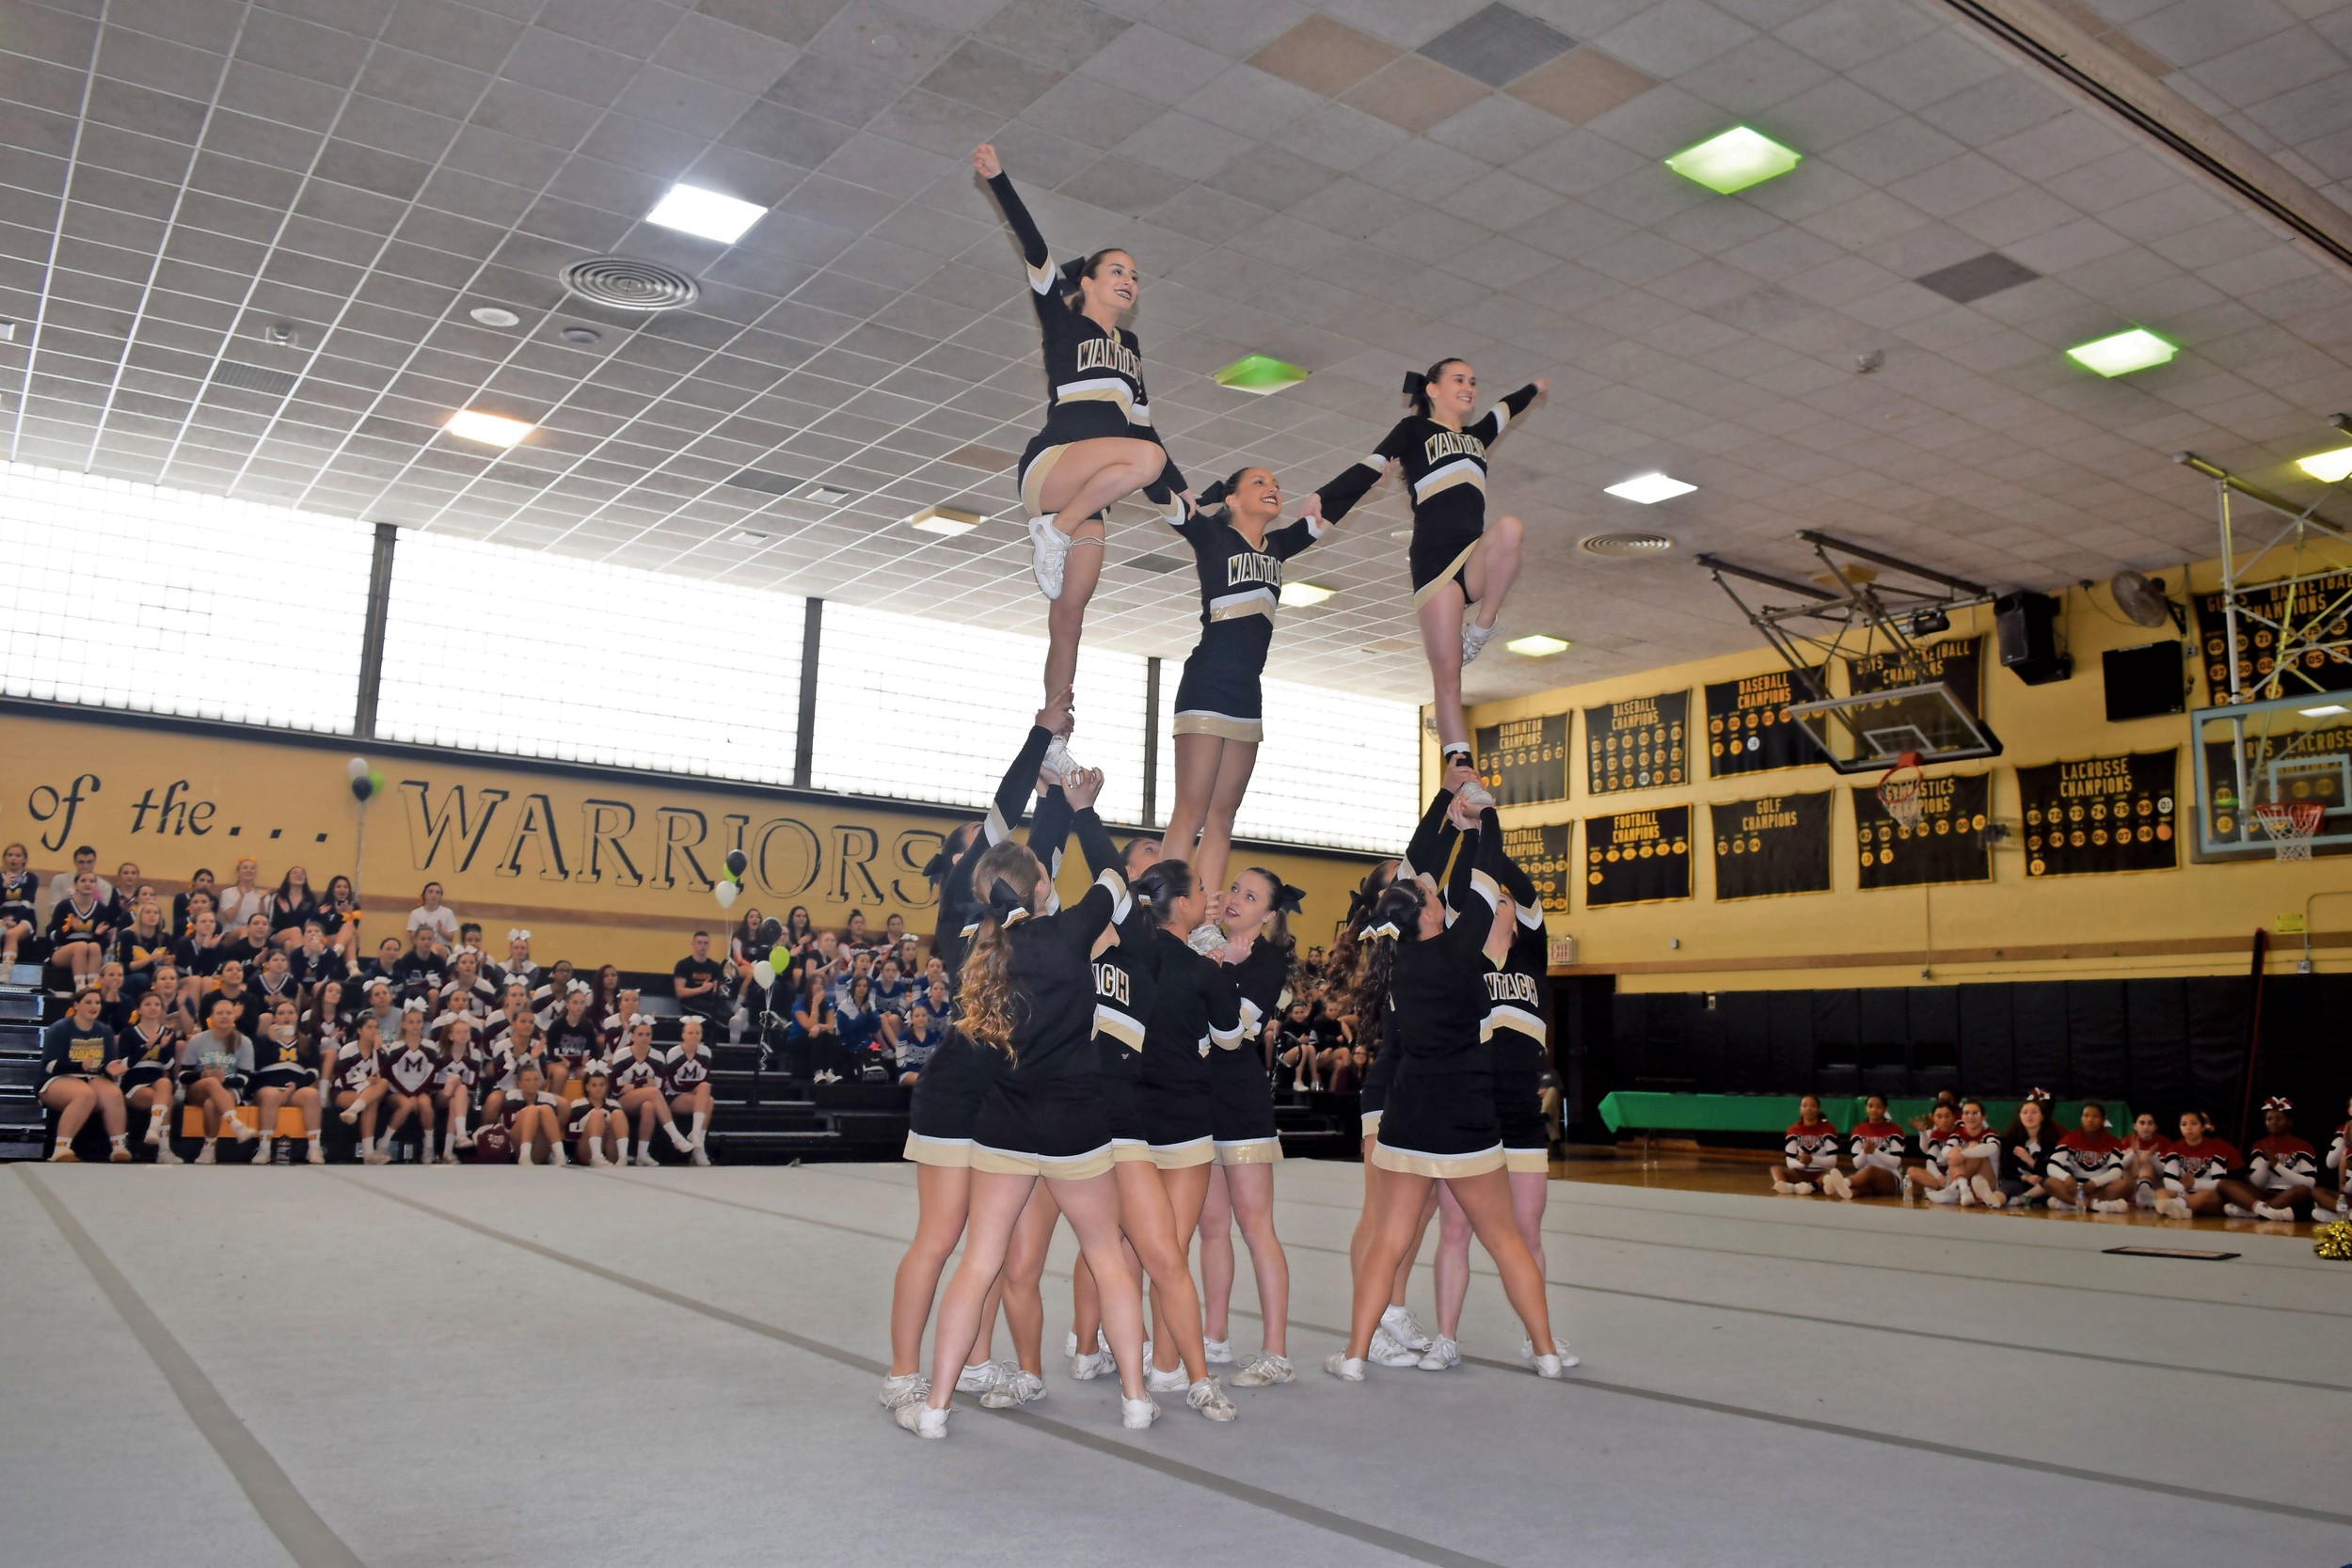 The Wantagh High School varsity cheerleading team won a county championship last weekend in front of the hometown crowd. The squad also placed sixth at the Universal Cheerleading Association’s National High School Cheerleading Championship last month.